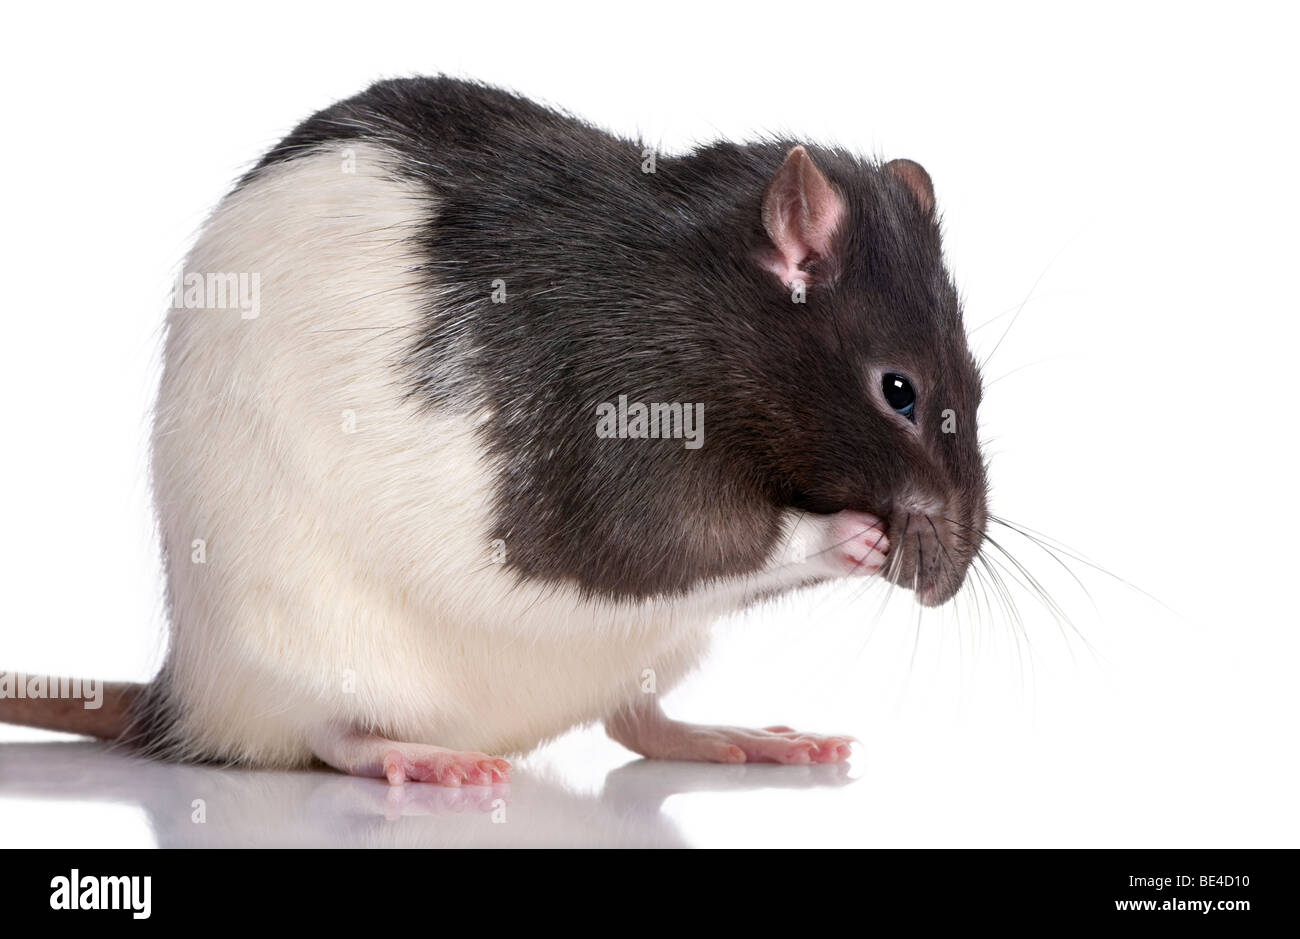 Black and white Rat in front of a white background, studio shot Stock Photo